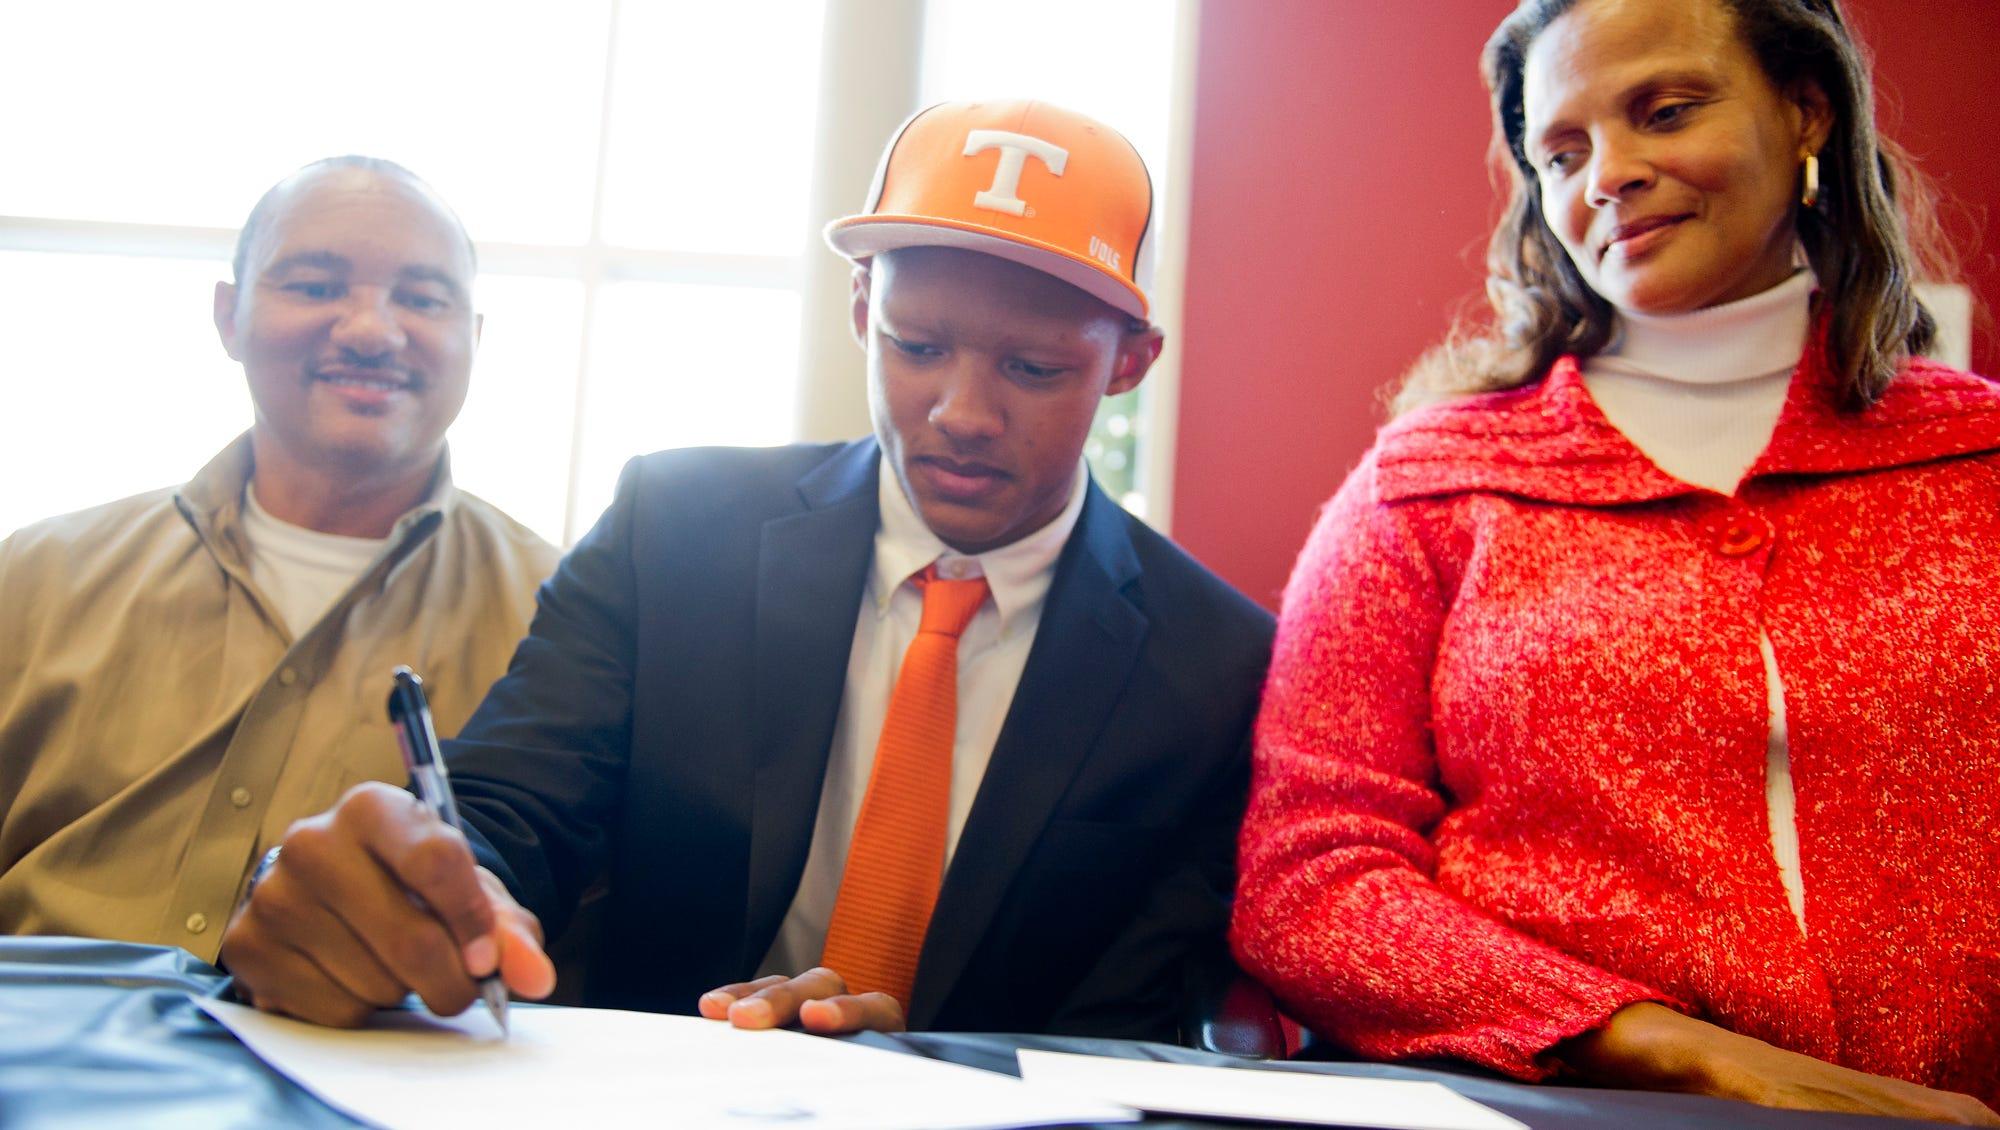 Seated between his father, Robert, and mother, Stephanie, Joshua Dobbs signs his letter of intent to play football at Tennessee on Feb. 6, 2013.